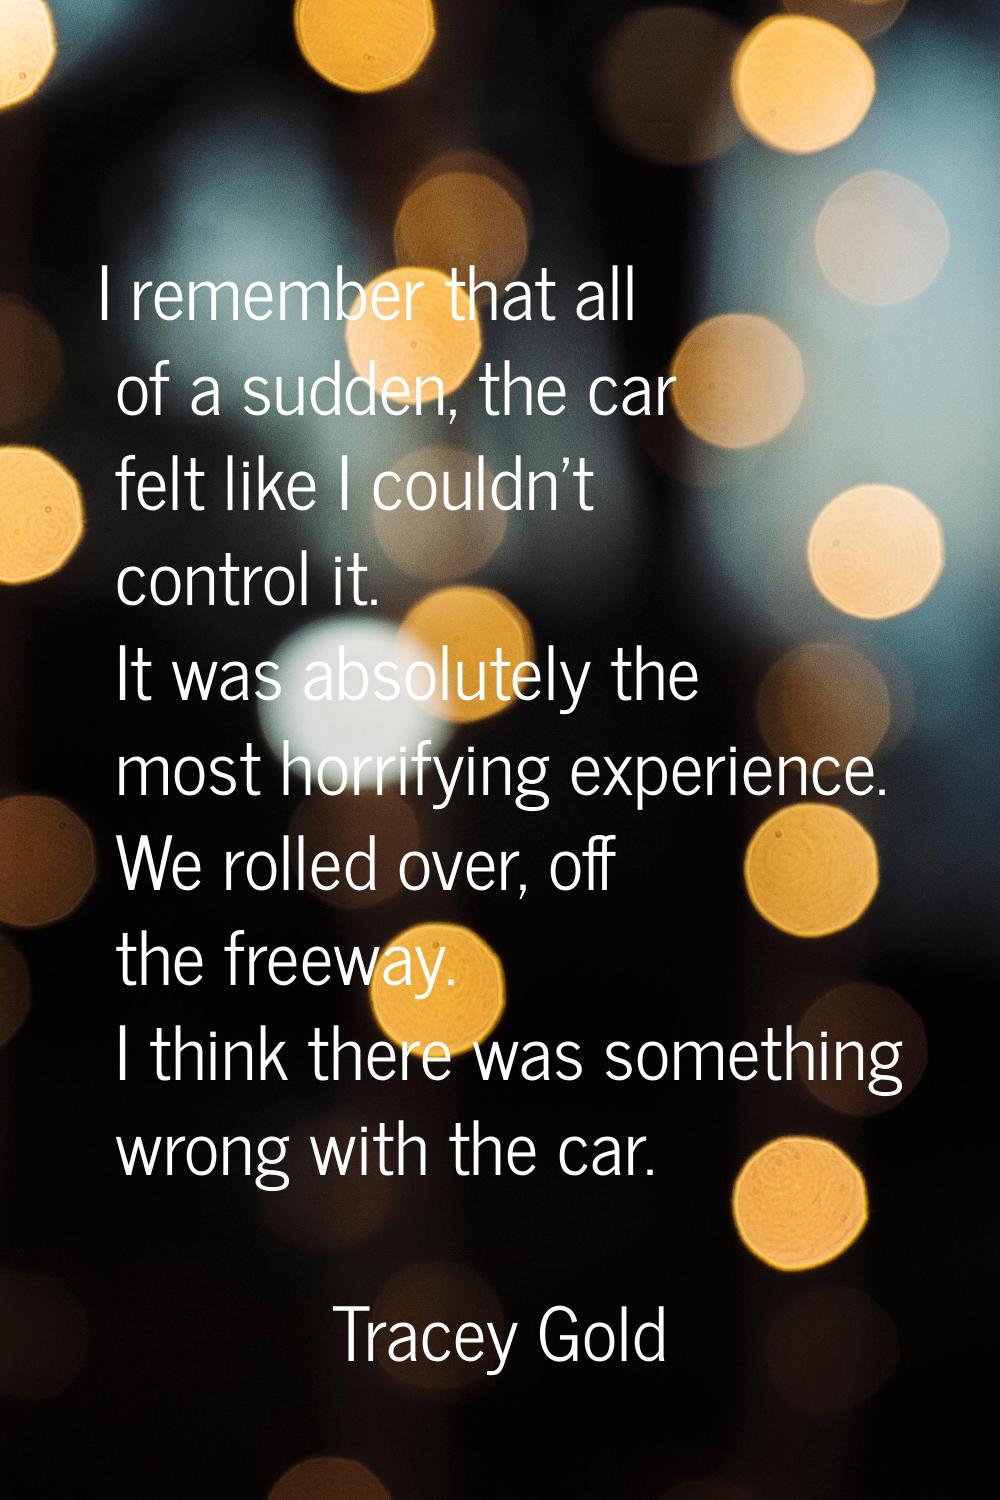 I remember that all of a sudden, the car felt like I couldn't control it. It was absolutely the mos